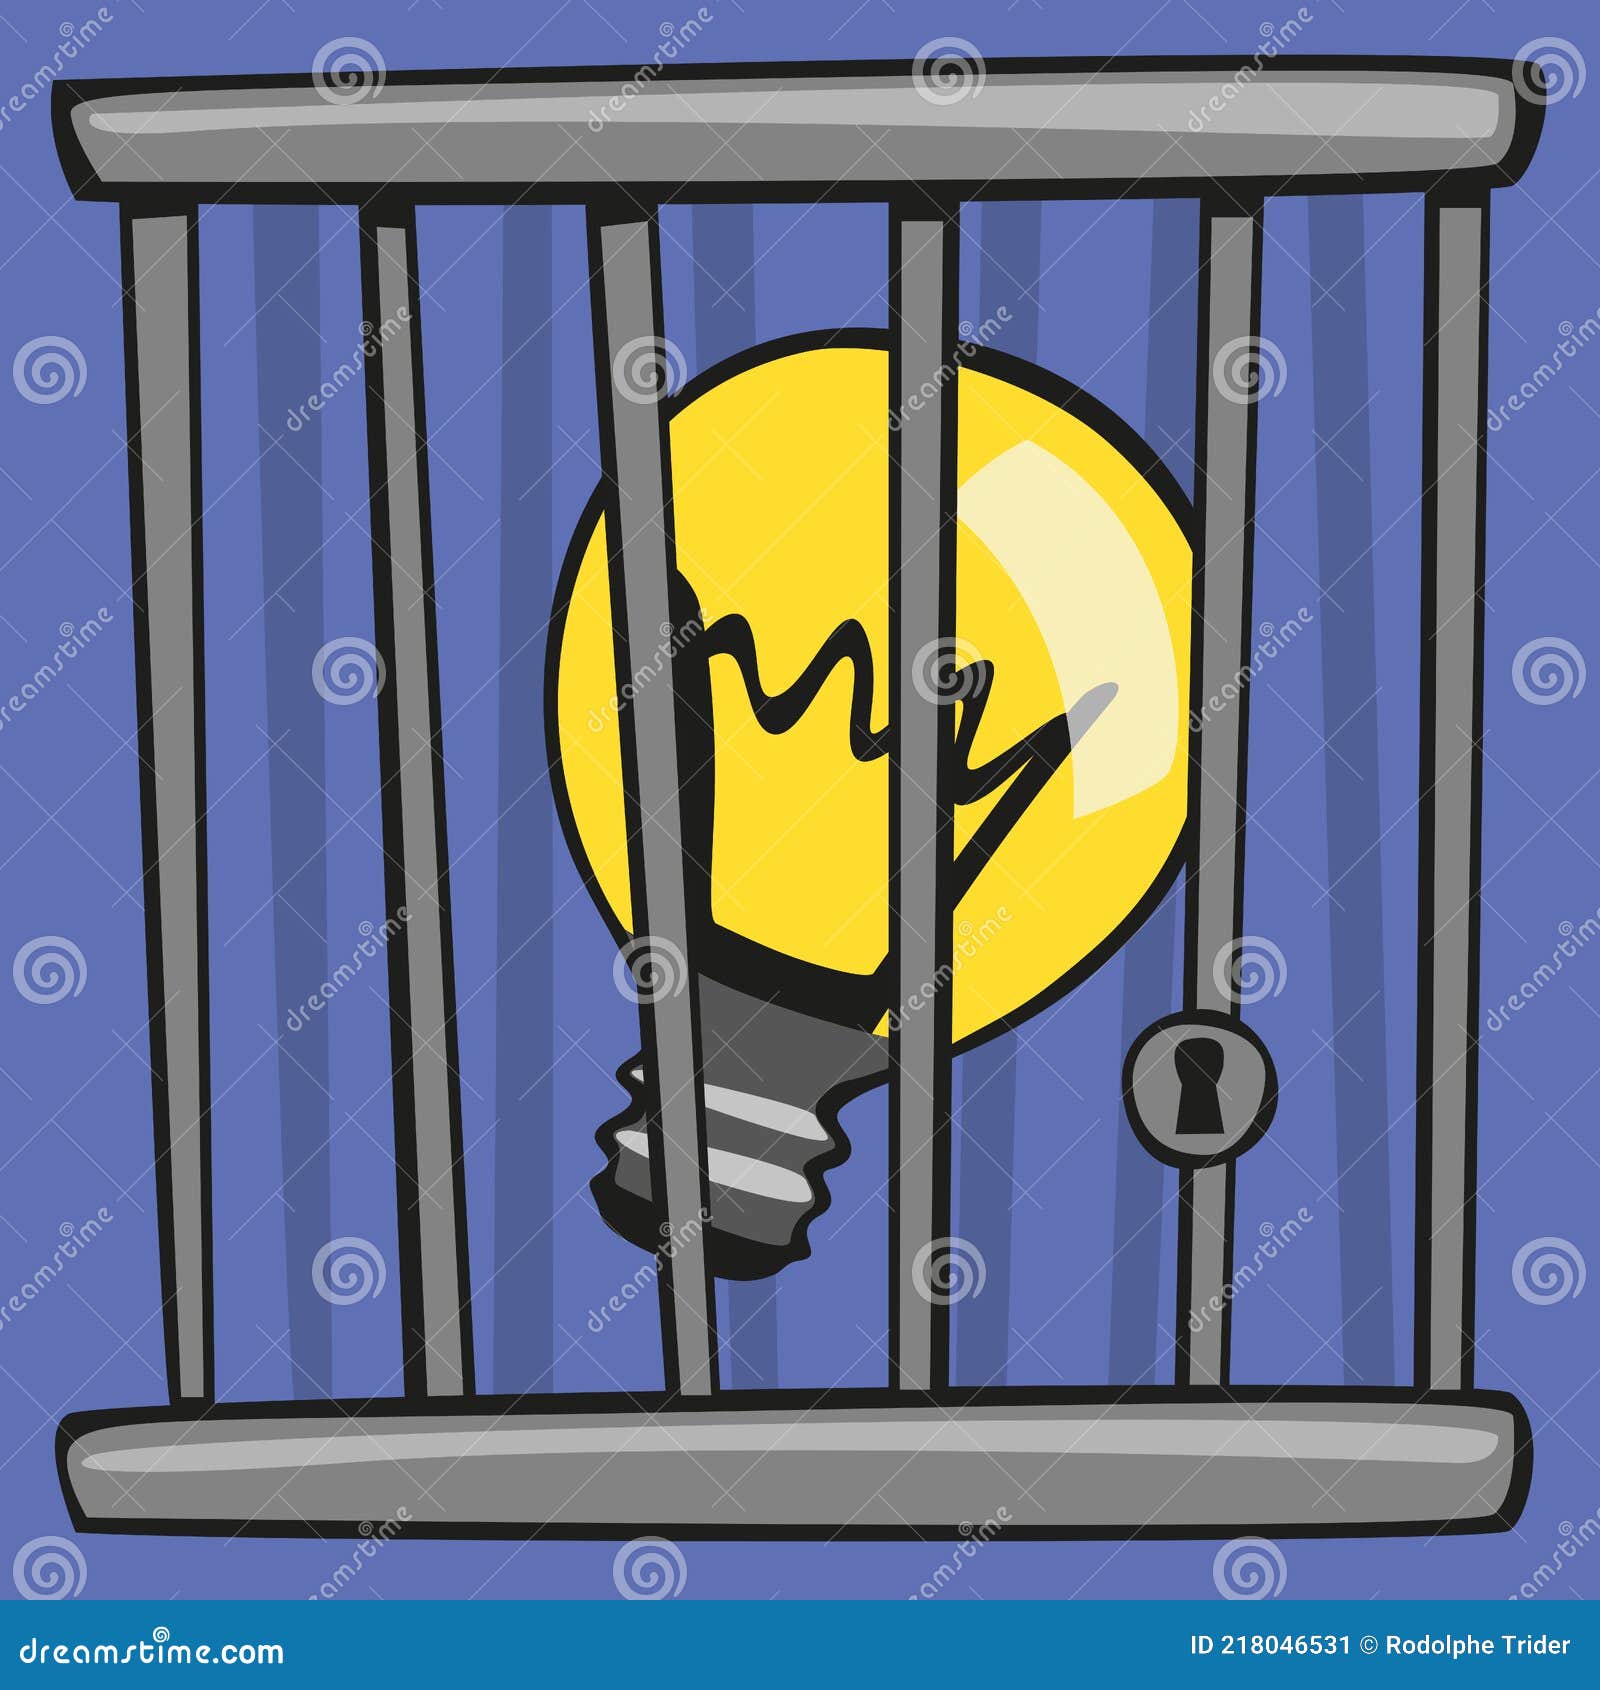 a light bulb is imprisoned to ize the censored idea.